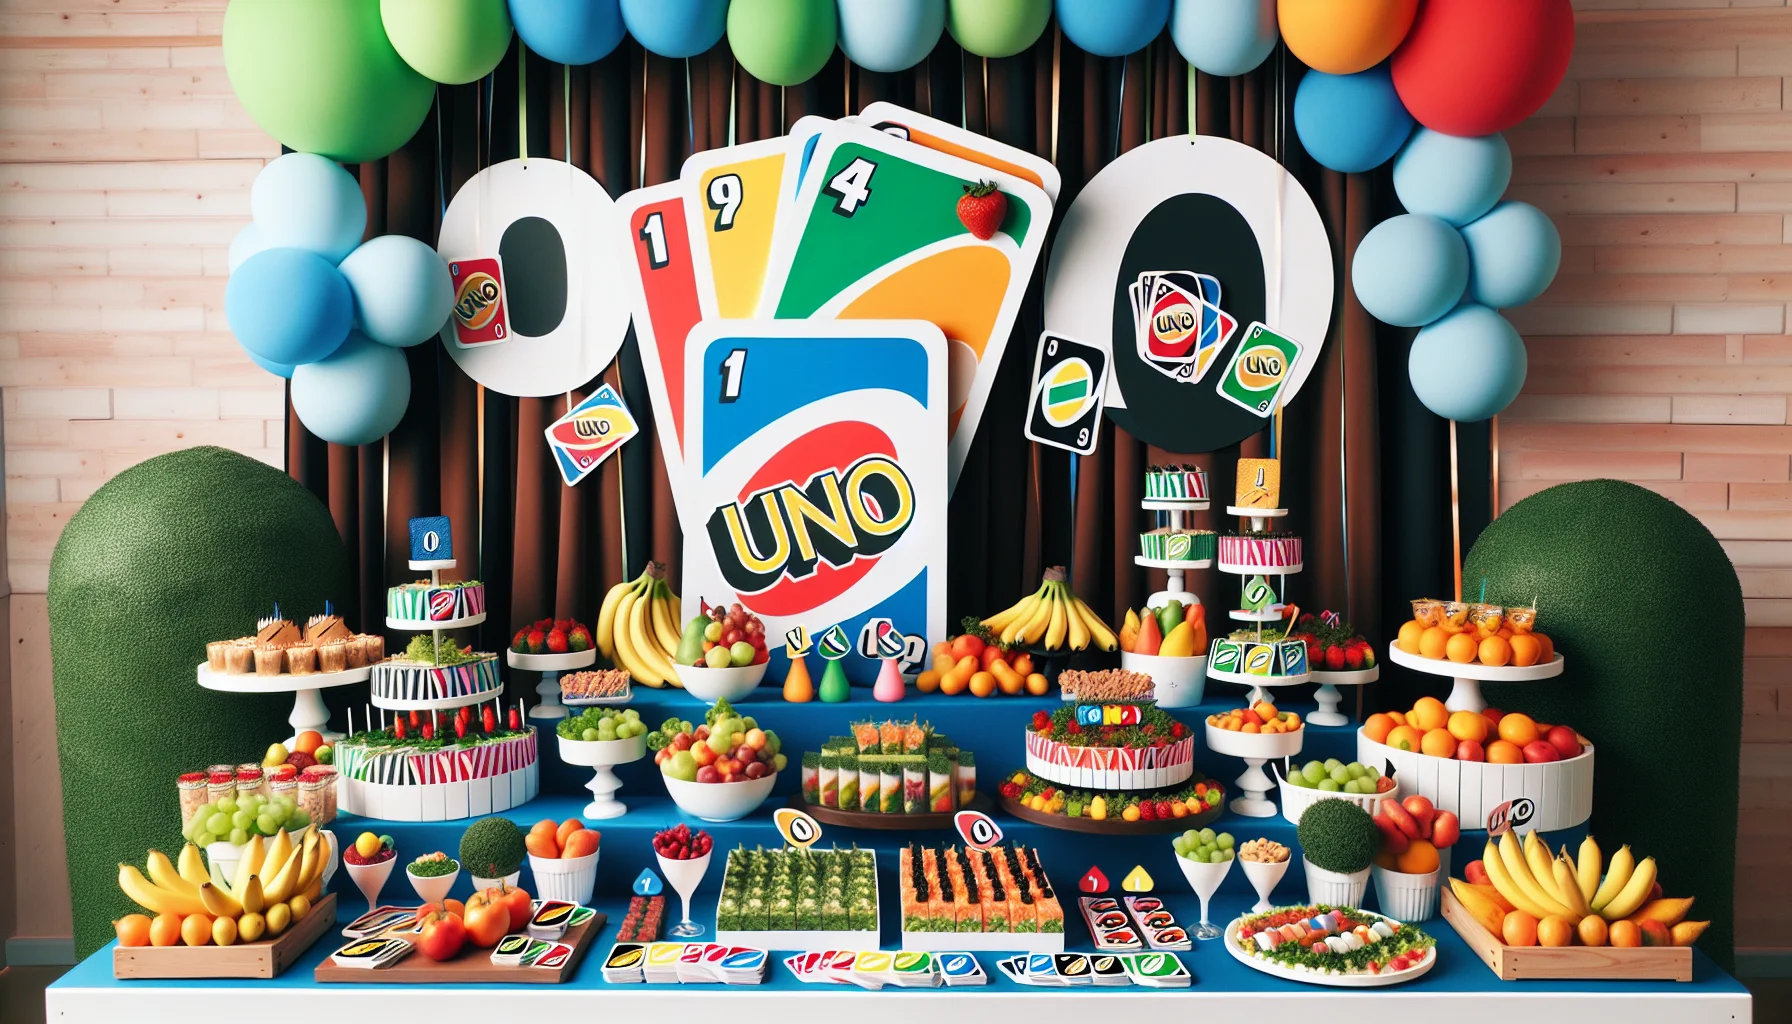 Design a hilarious scene for an UNO-themed birthday party, incorporating decor ideas that inspire a feeling of whimsy and excitement among the guests. Center the decor on oversized UNO cards and colors used in the game. The food arrangement at the party takes a creative turn, showcasing a variety of health foods styled in an enticingly budget-friendly manner. There could be a fruits and veggies station dressed as a UNO 'Reverse card', encouraging guests to reverse their unhealthy eating habits. Let's not forget a mini salad bar mimicking the color stack, visually representing how each color corresponds to a different type of salad.